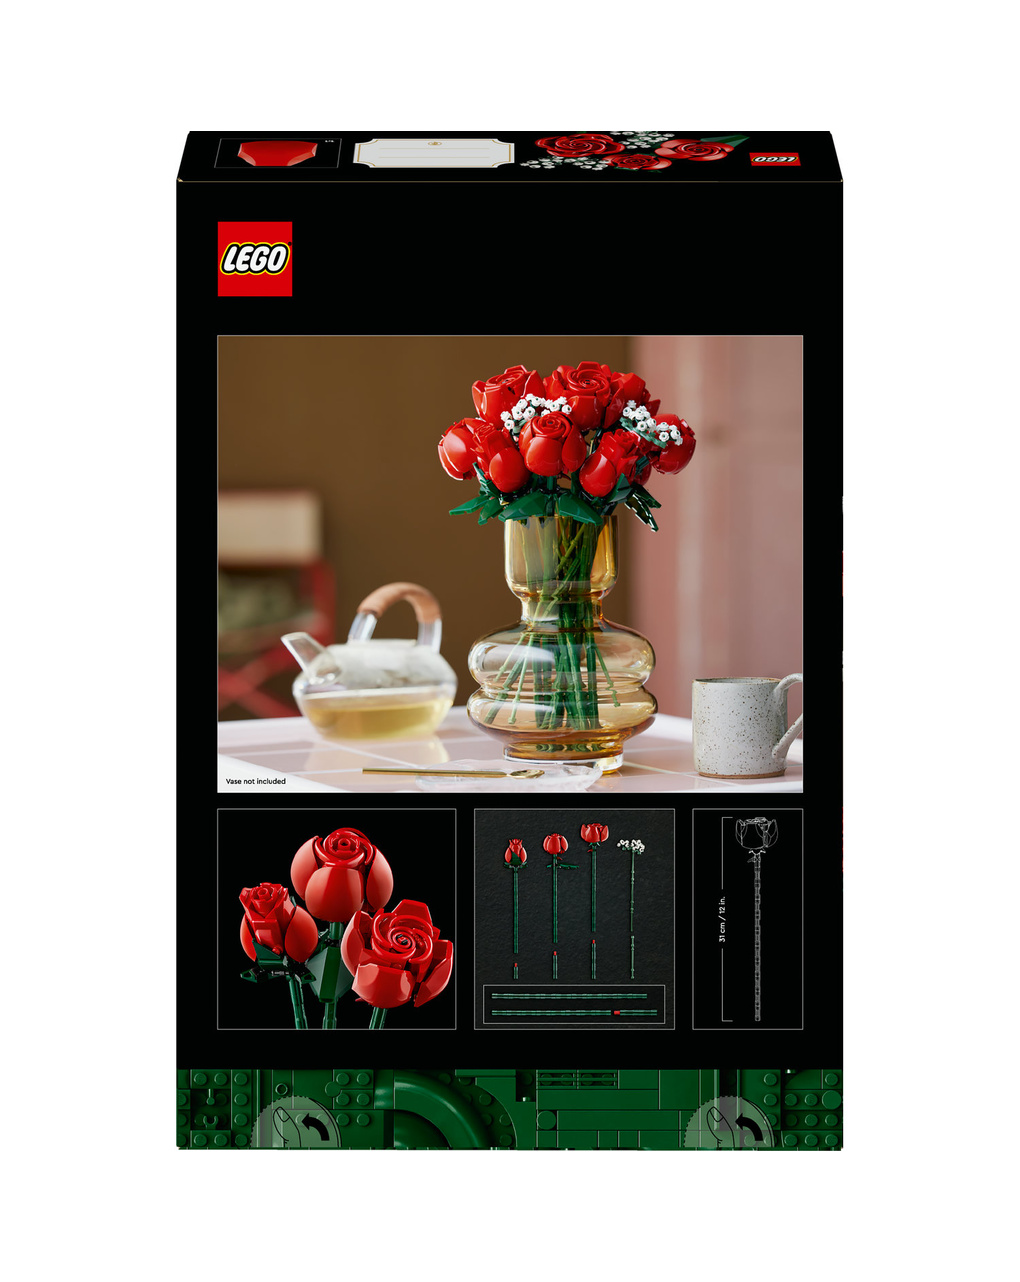 Bouquet di rose - 10328 - lego icons - LEGO Icons